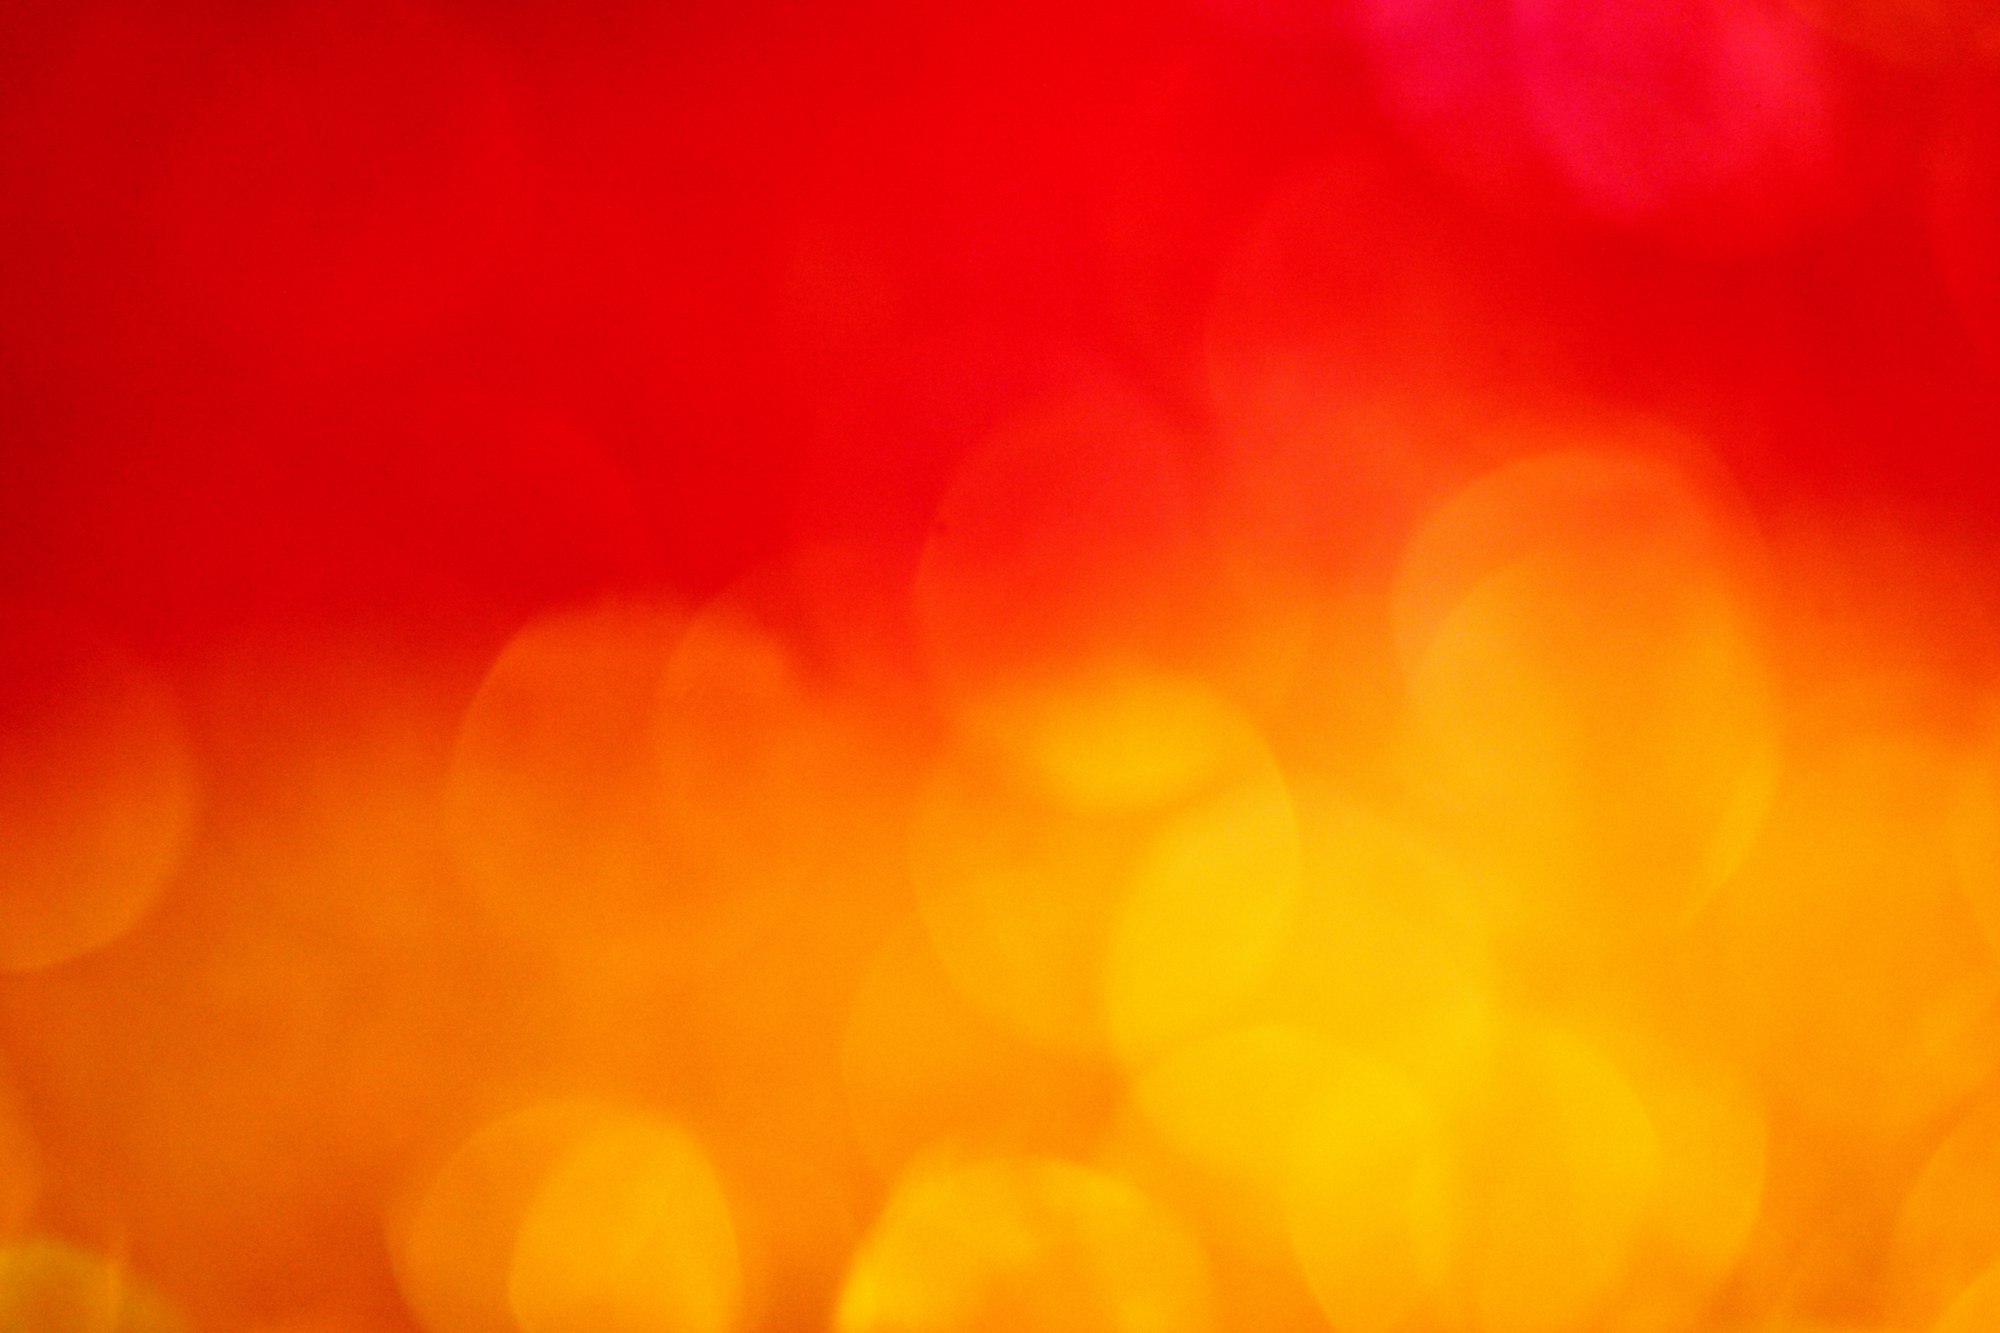 Warm red and orange bokeh fire background wallpaper.